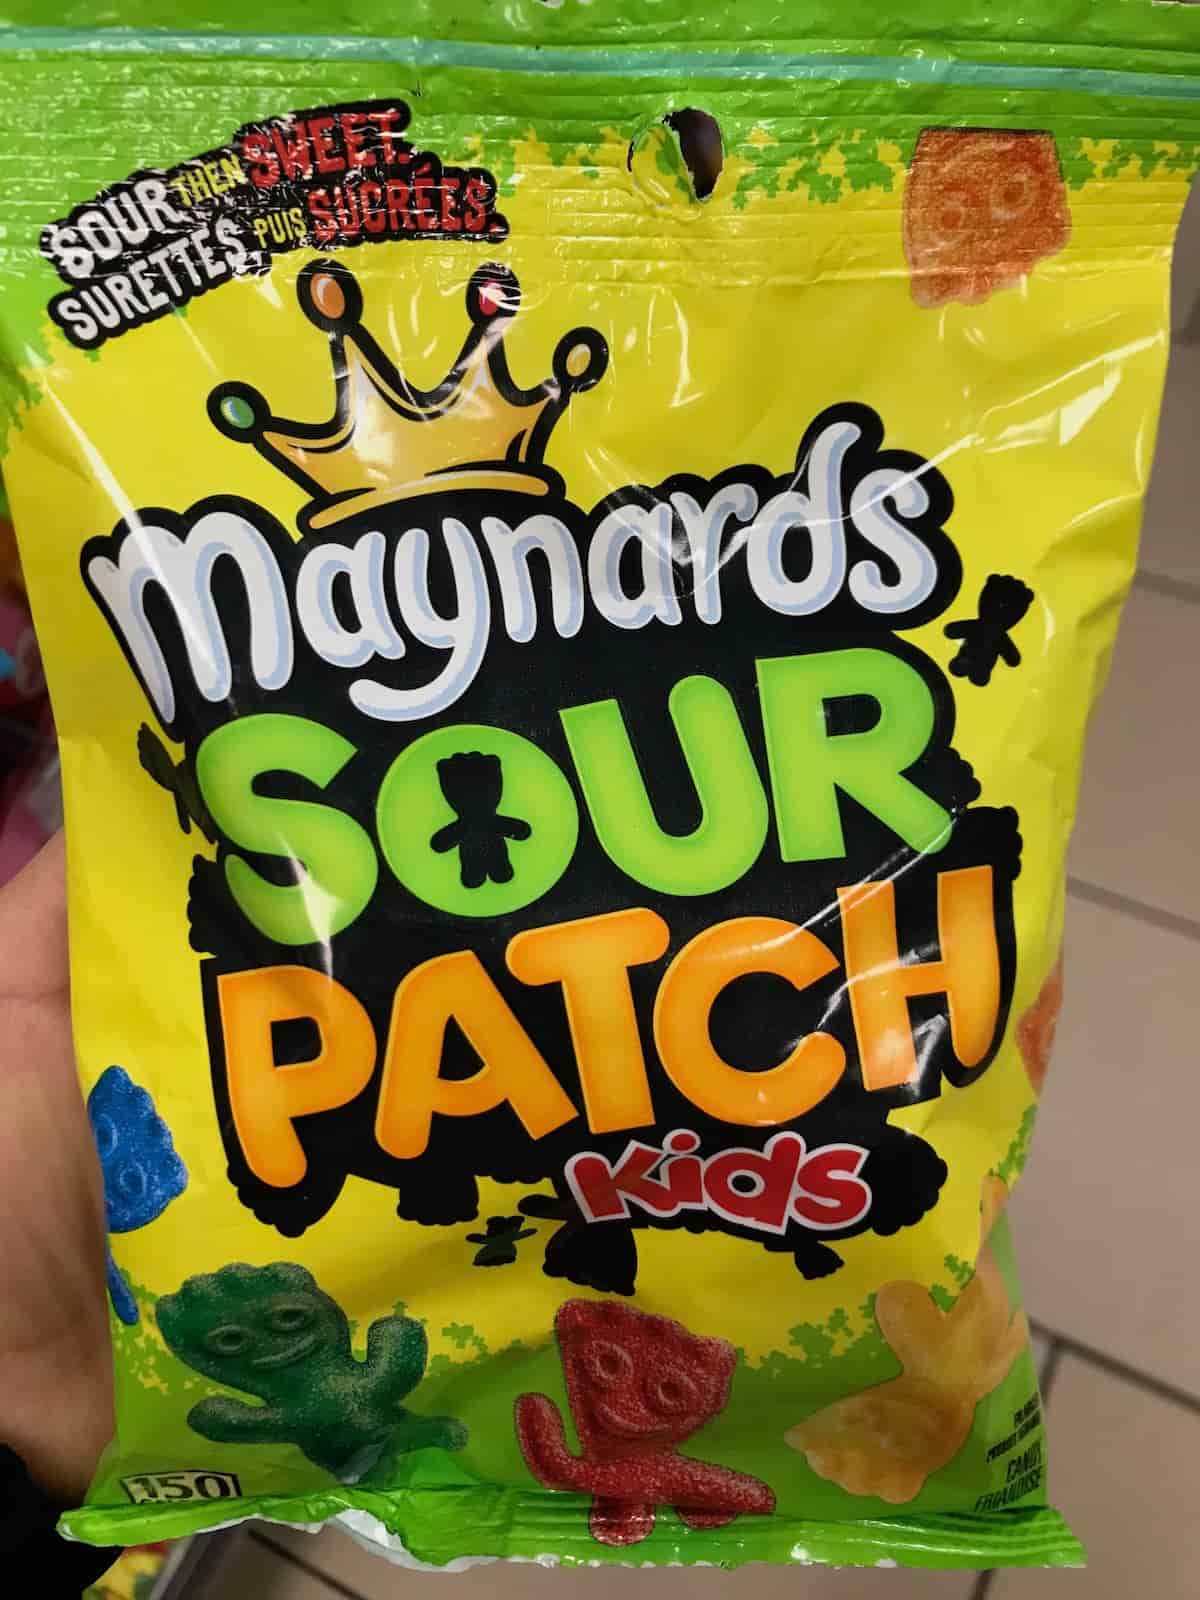 A package of Sour Patch Kids.